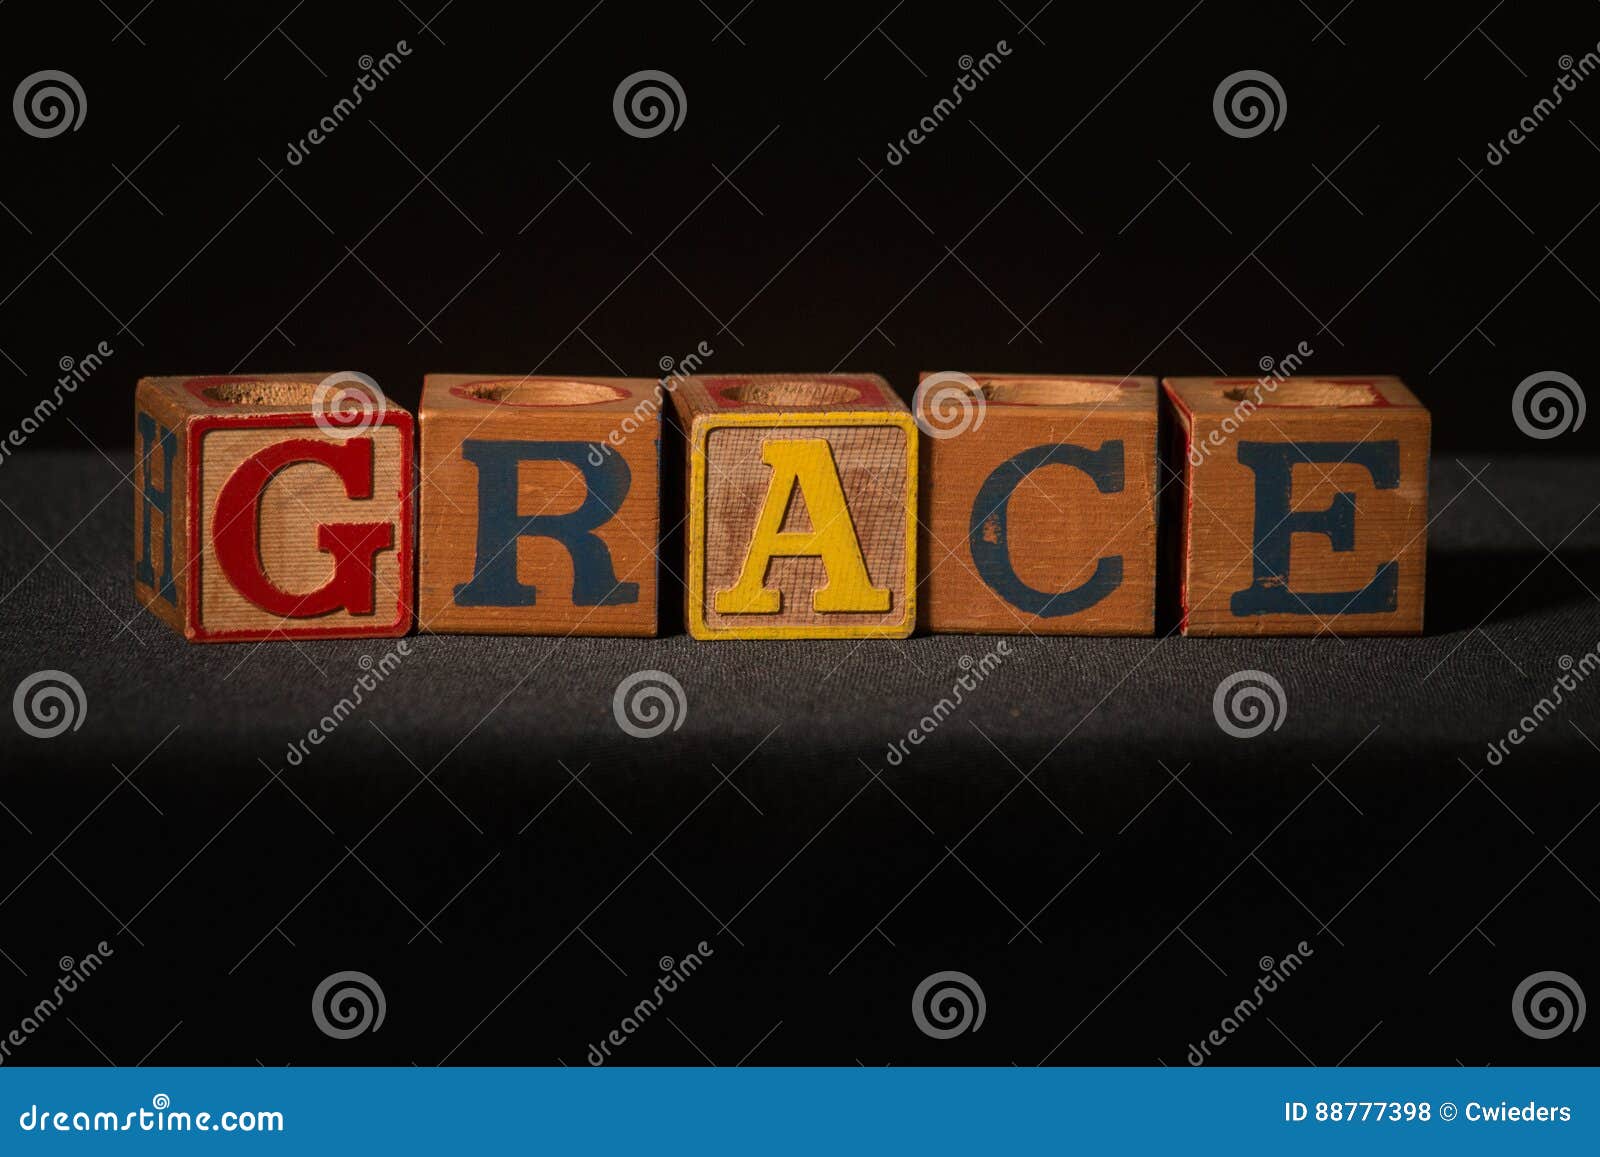 wooden blocks spelling out the word grace